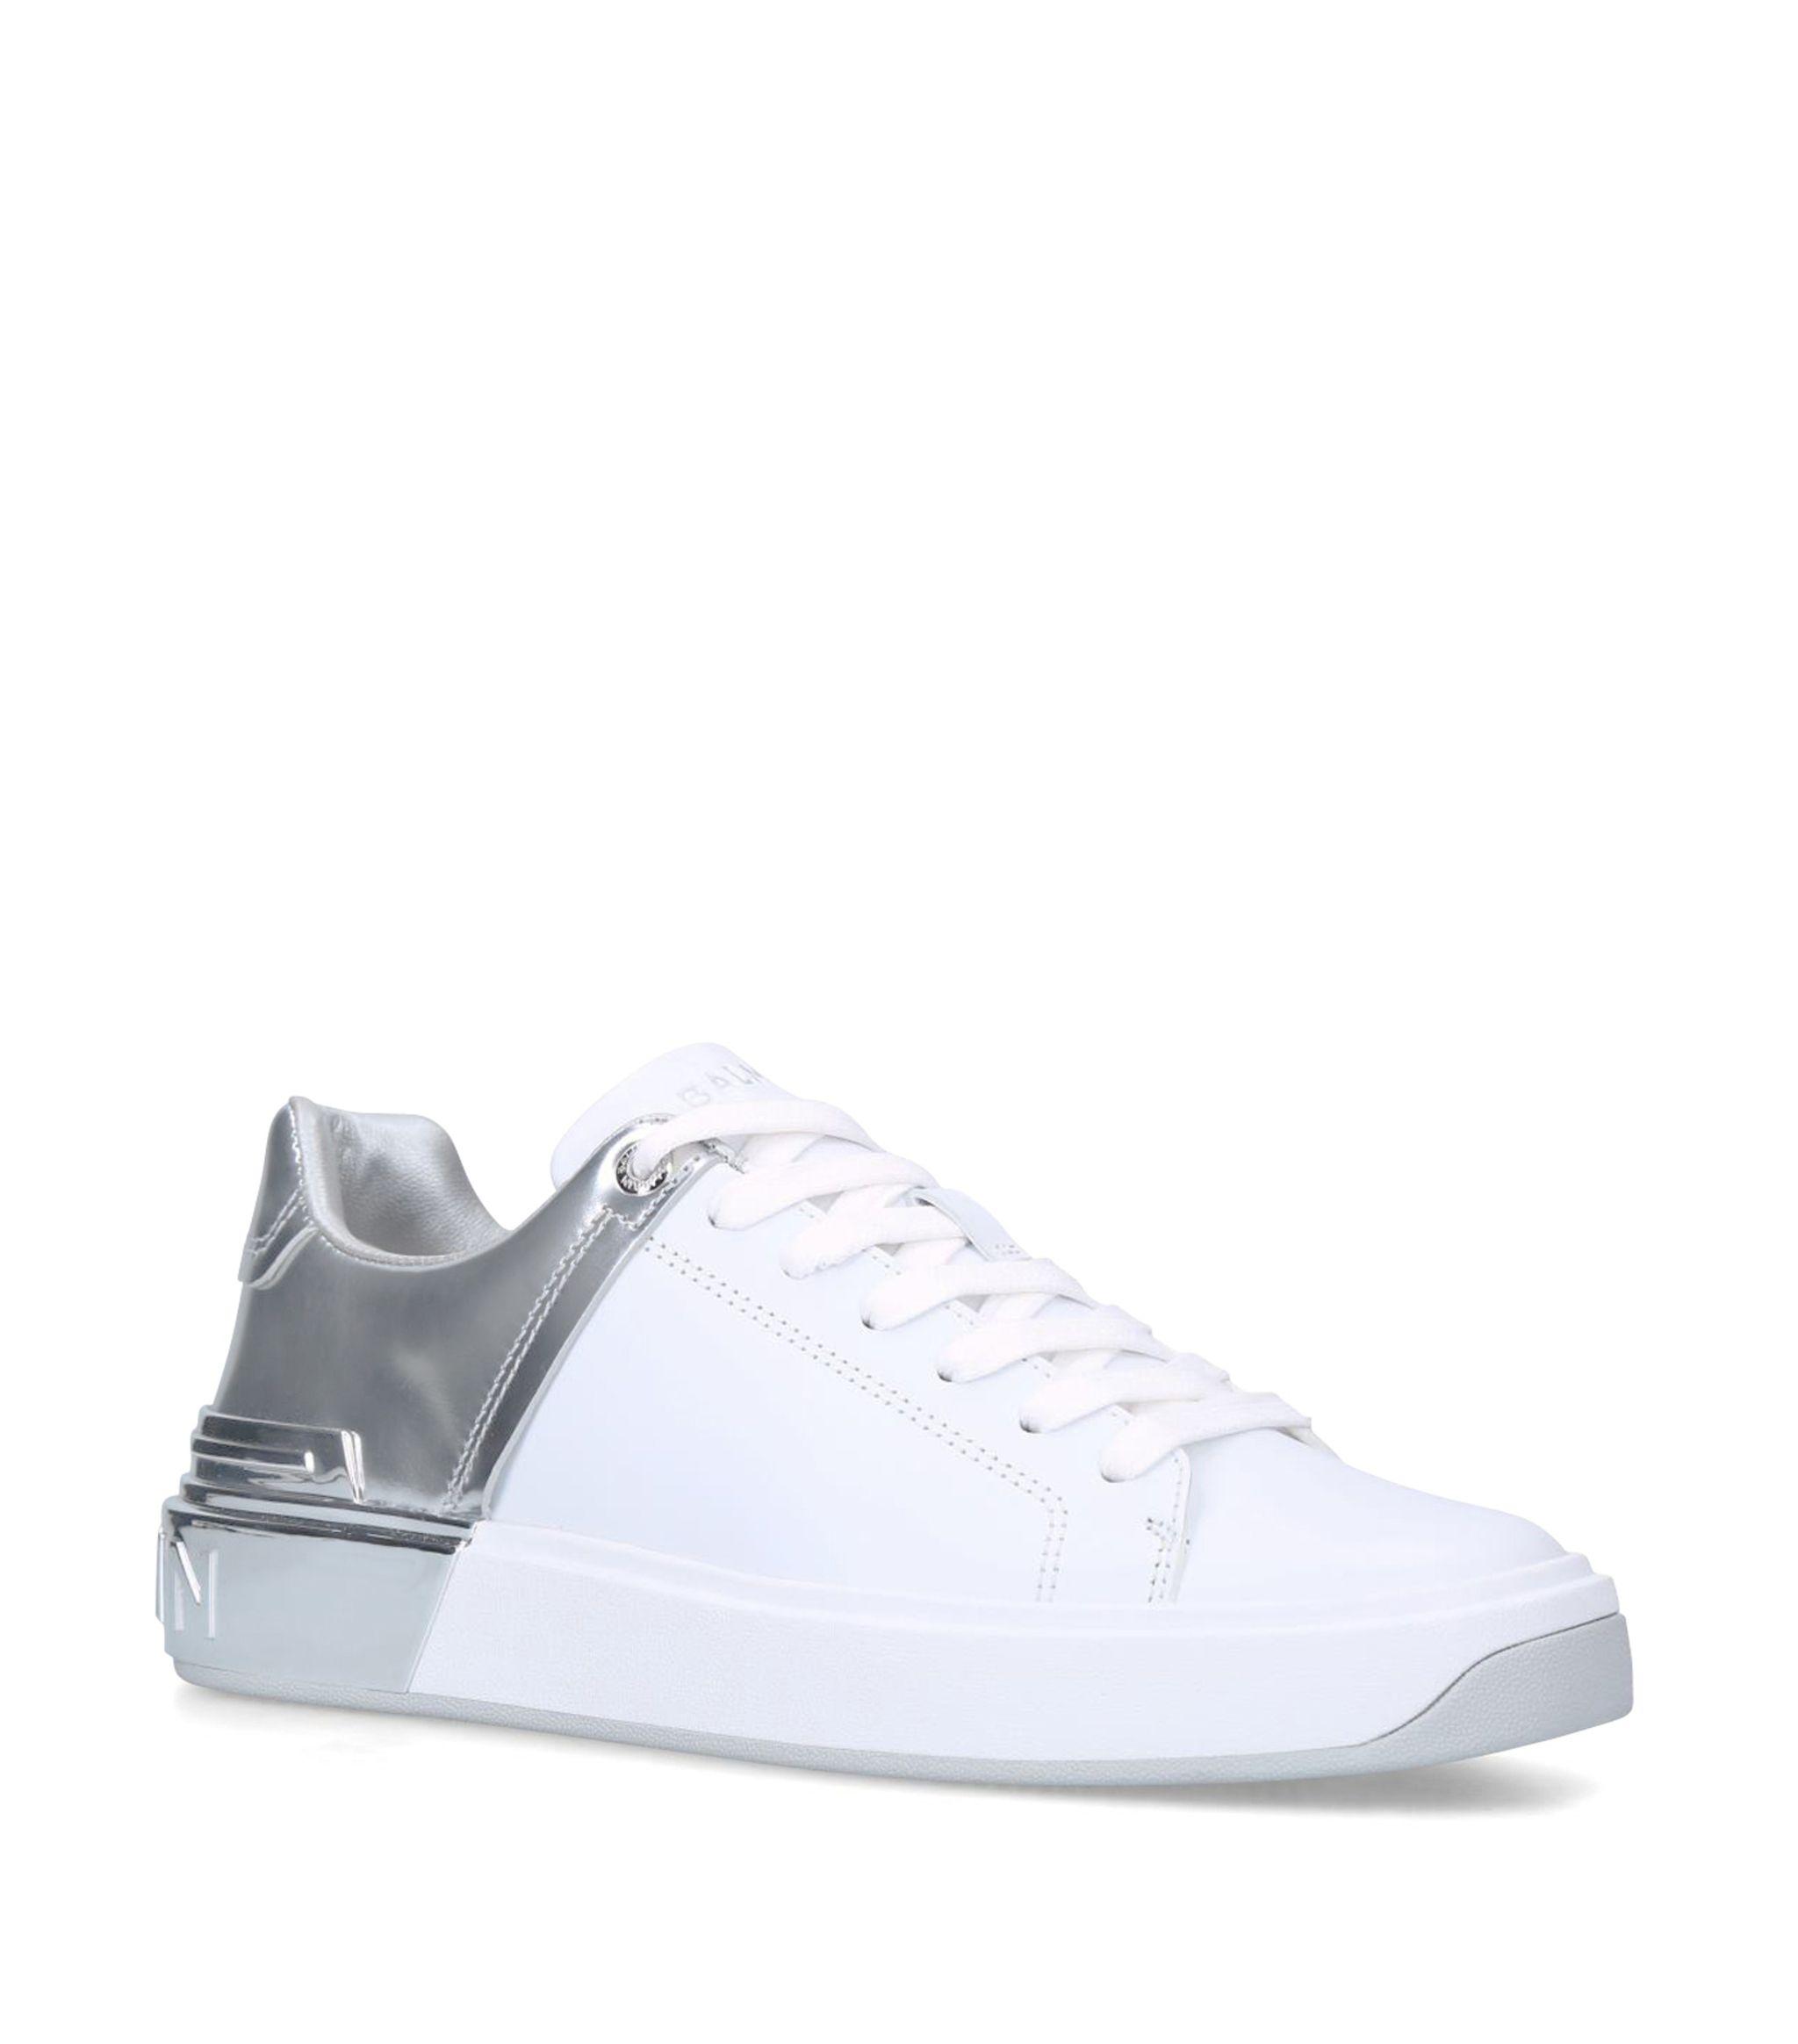 Balmain Leather B Court Sneakers in White Save 38% Lyst